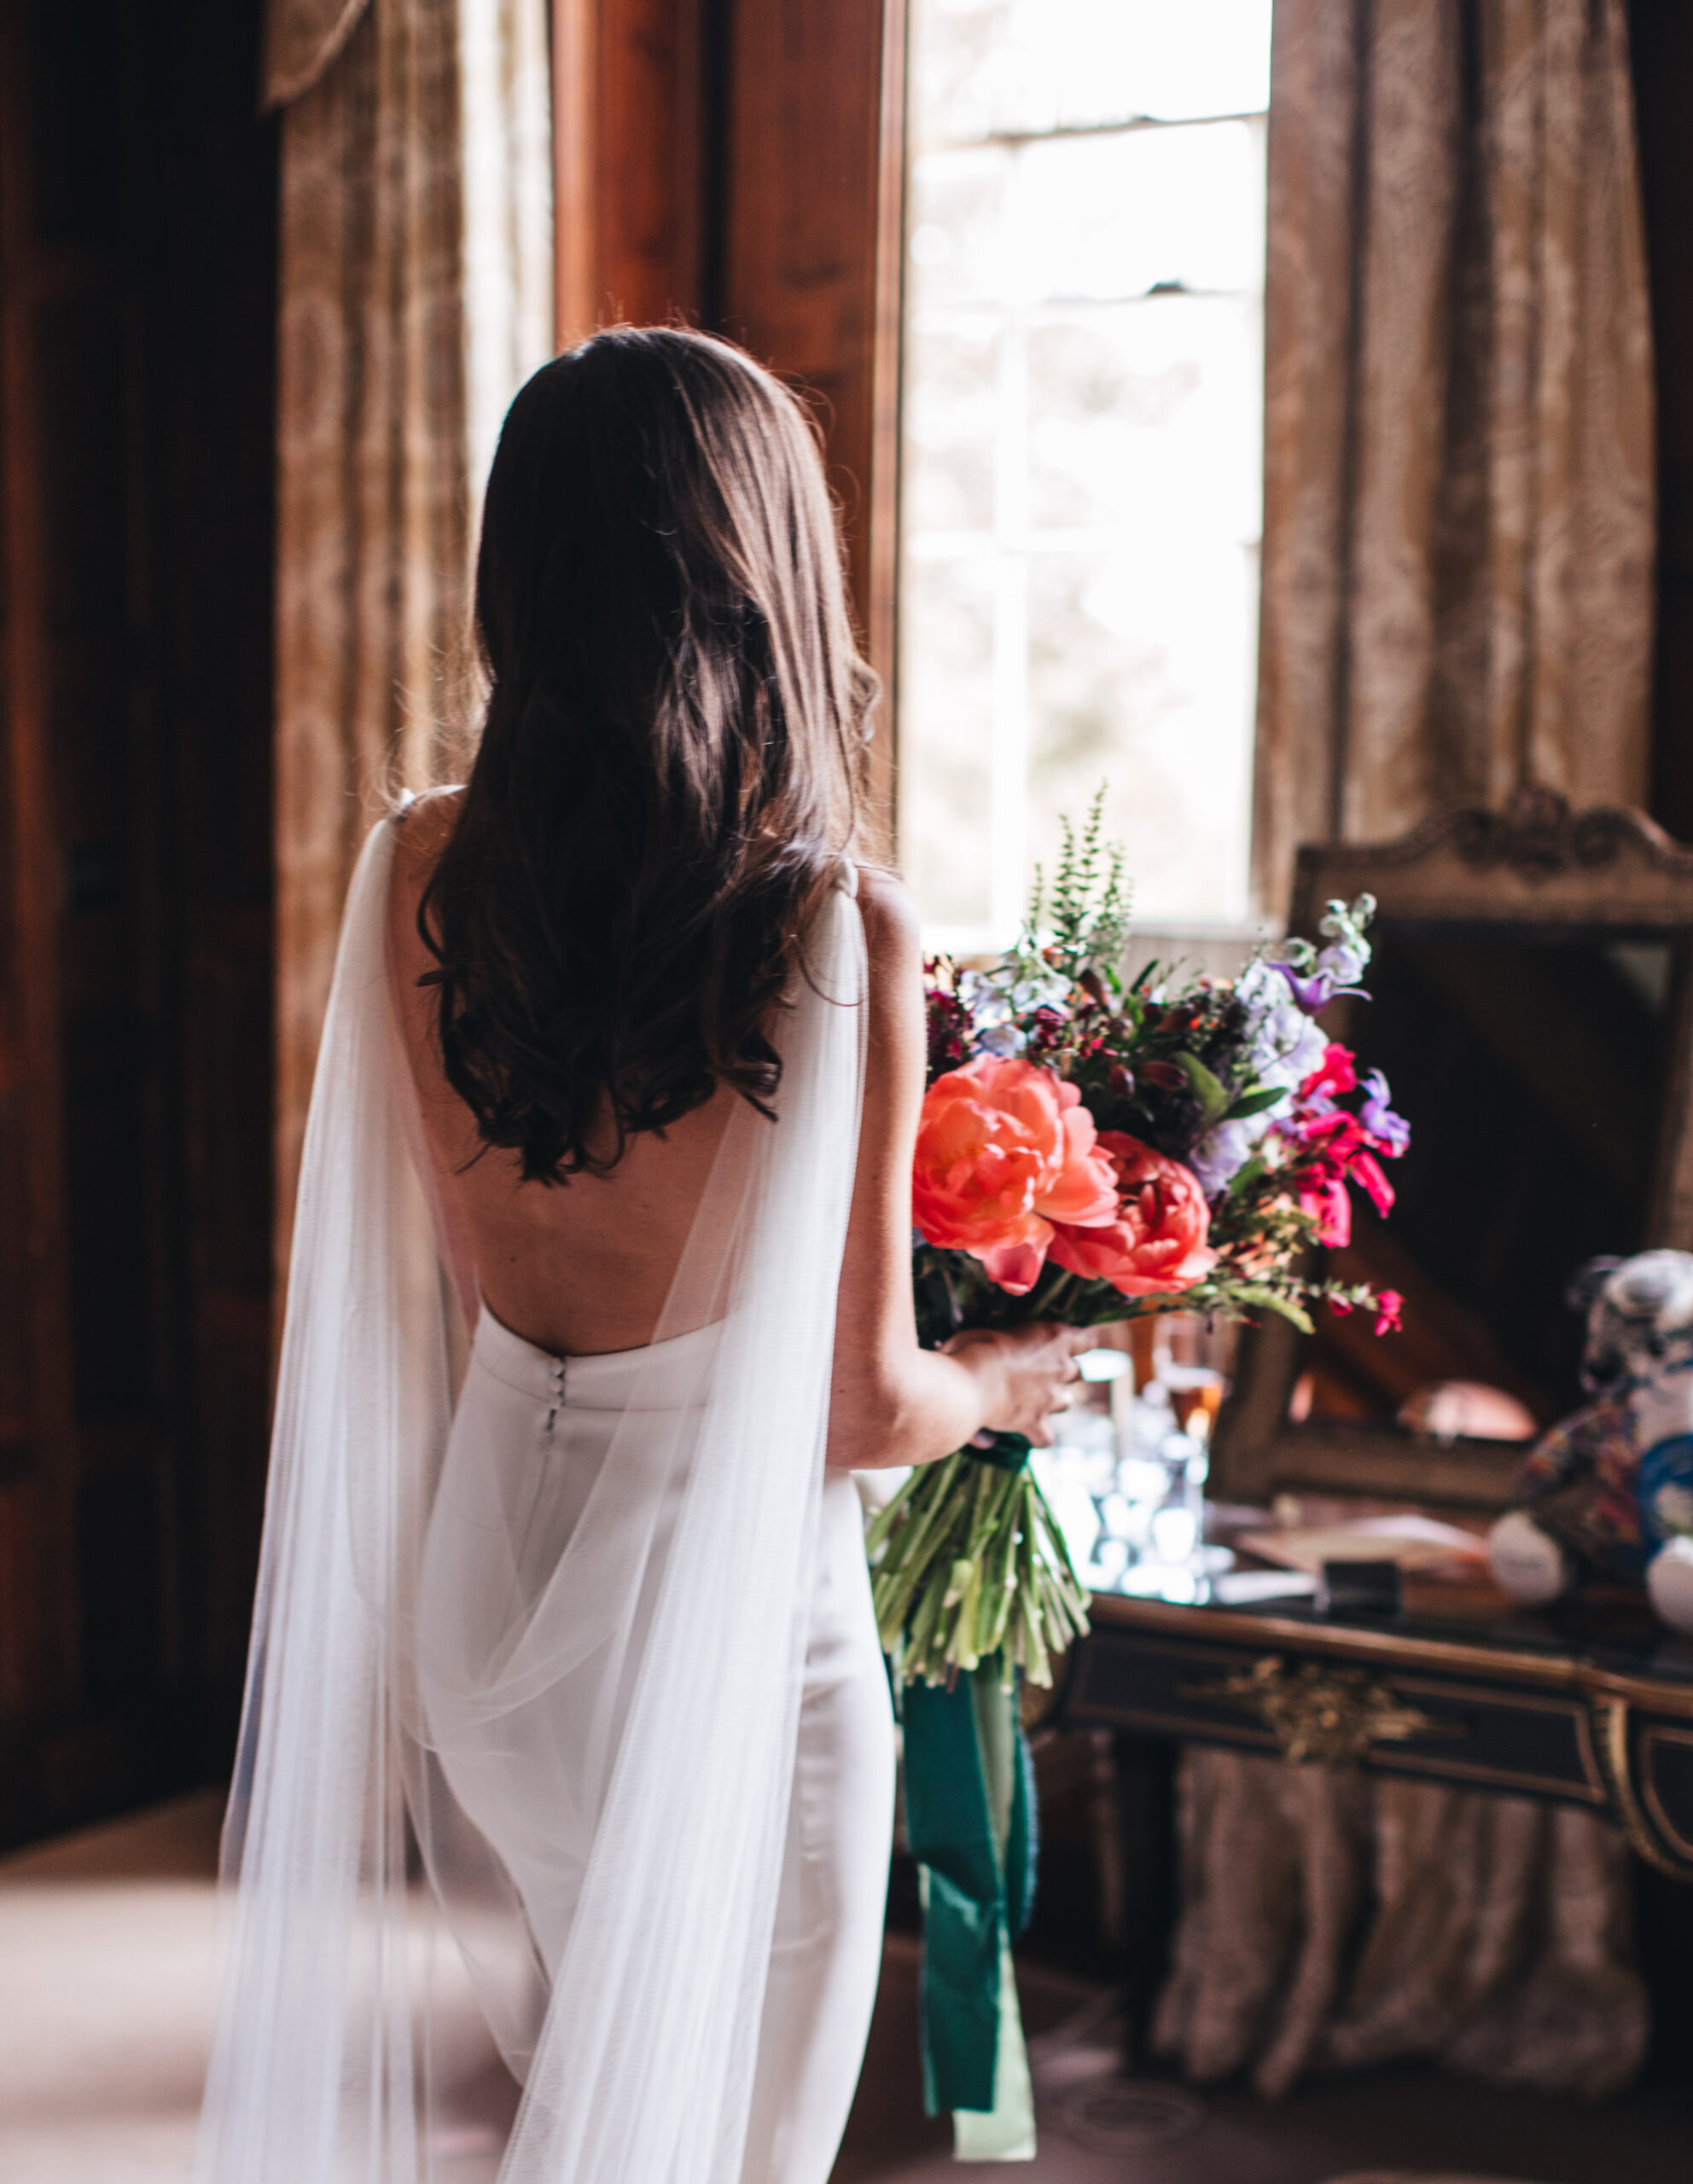 bride wearing backless wedding dress with chiffon train, holding peonies and spring flowers bouquet